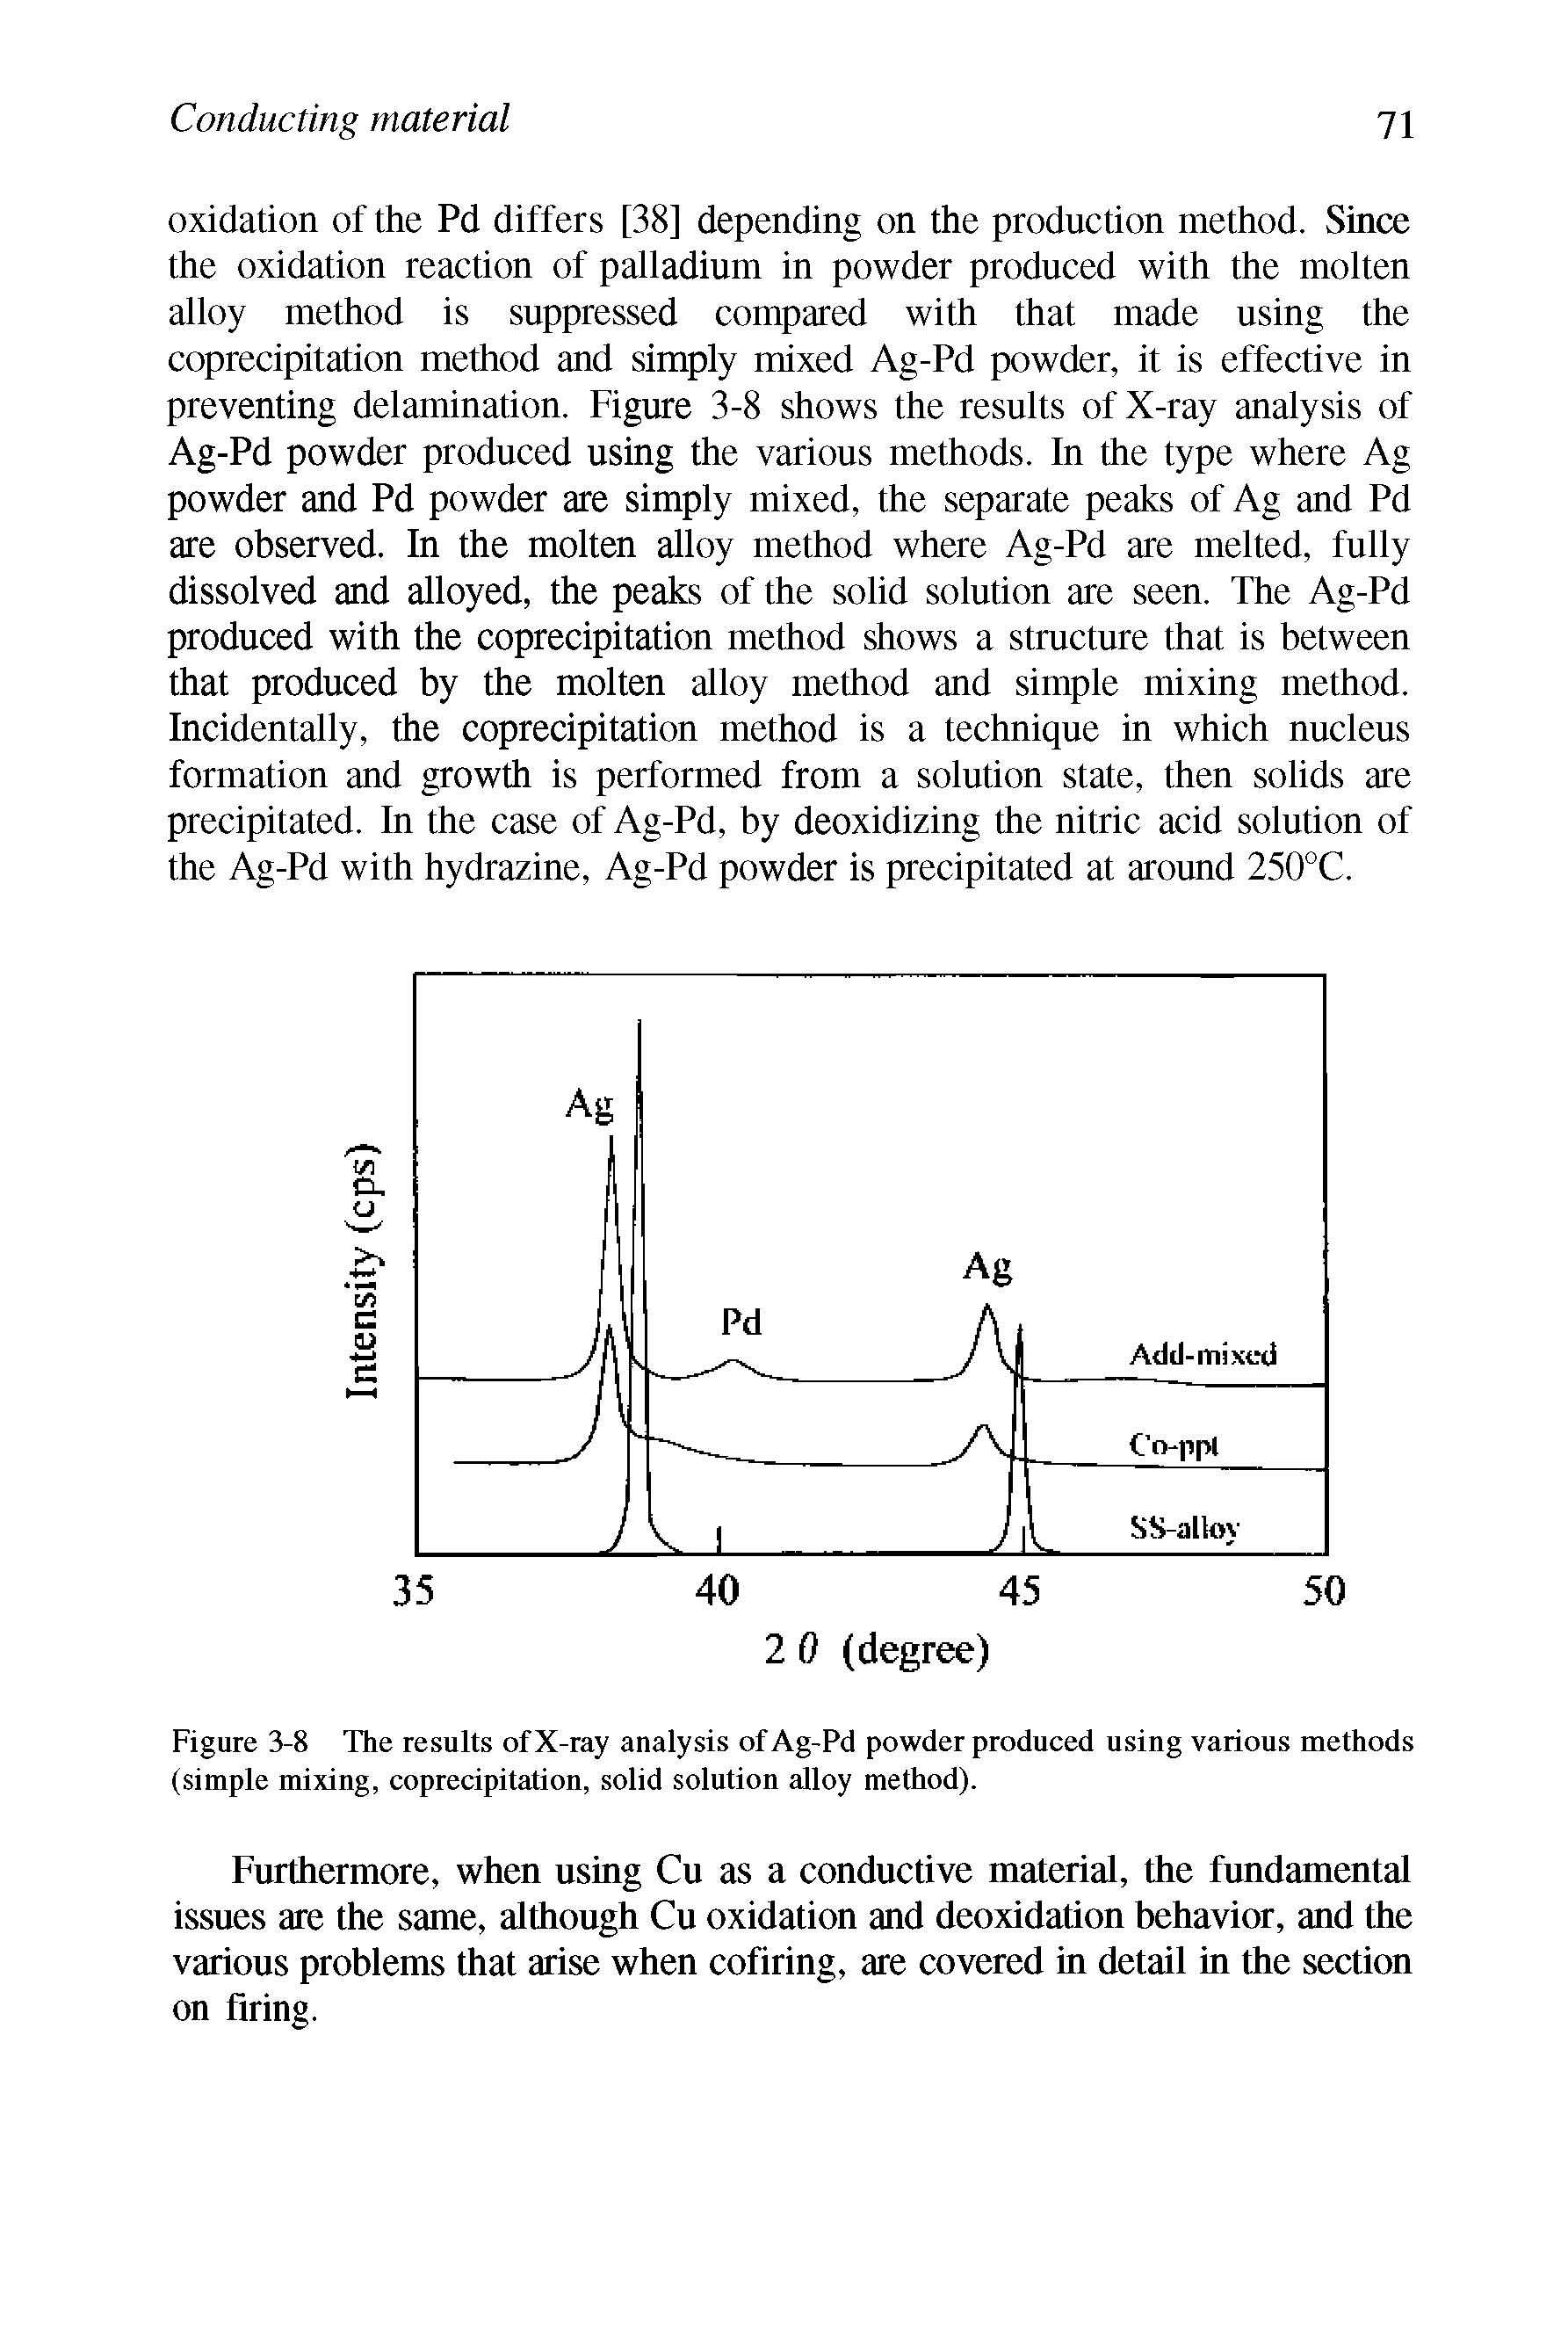 Figure 3-8 The results of X-ray analysis of Ag-Pd powder produced using various methods (simple mixing, copredpitation, solid solution alloy method).